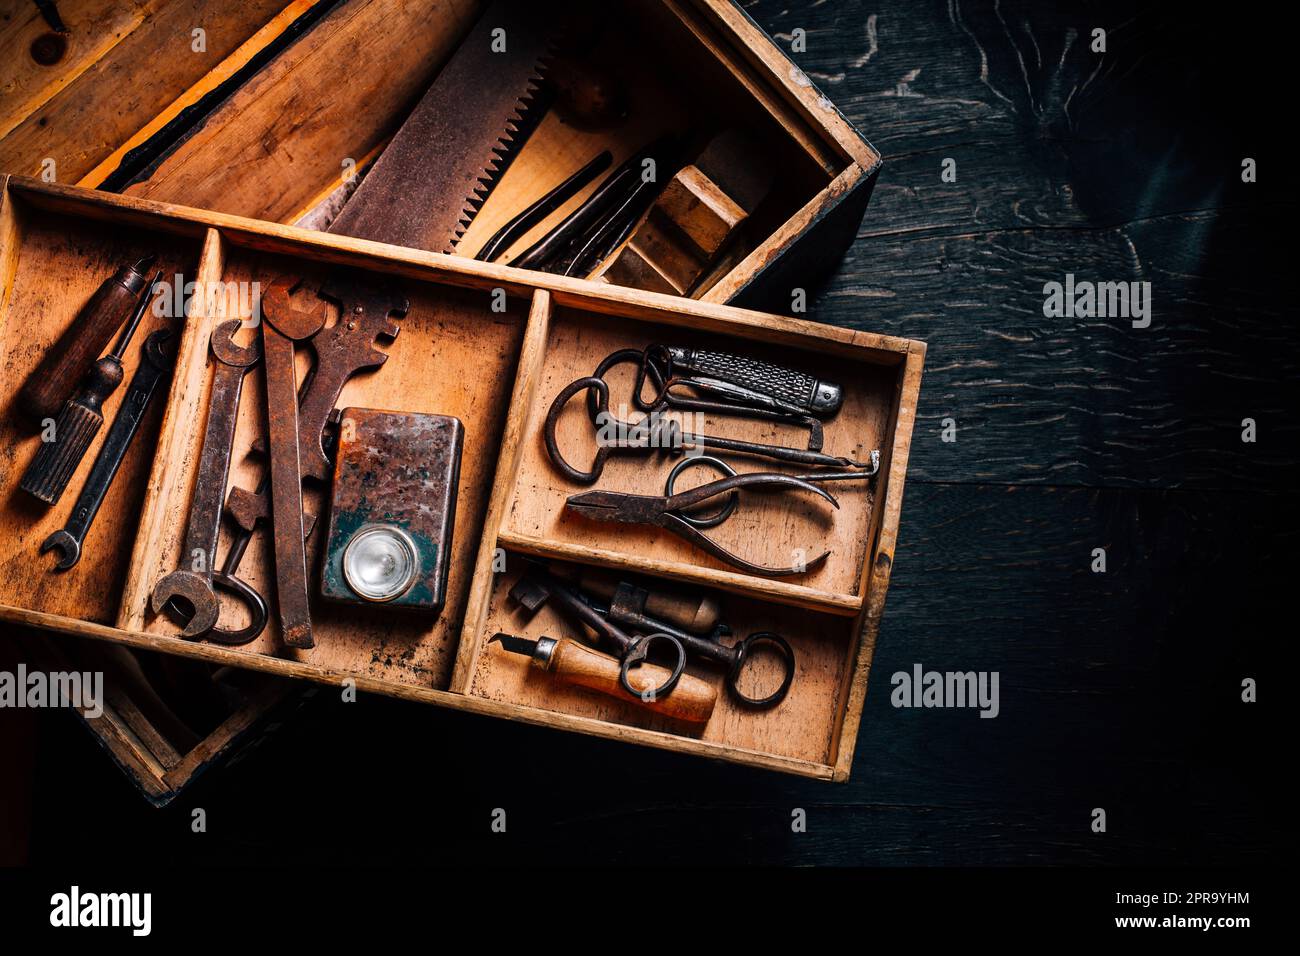 Collection of vintage carpentry tools in old wooden chest: woodworking, craftsmanship Stock Photo